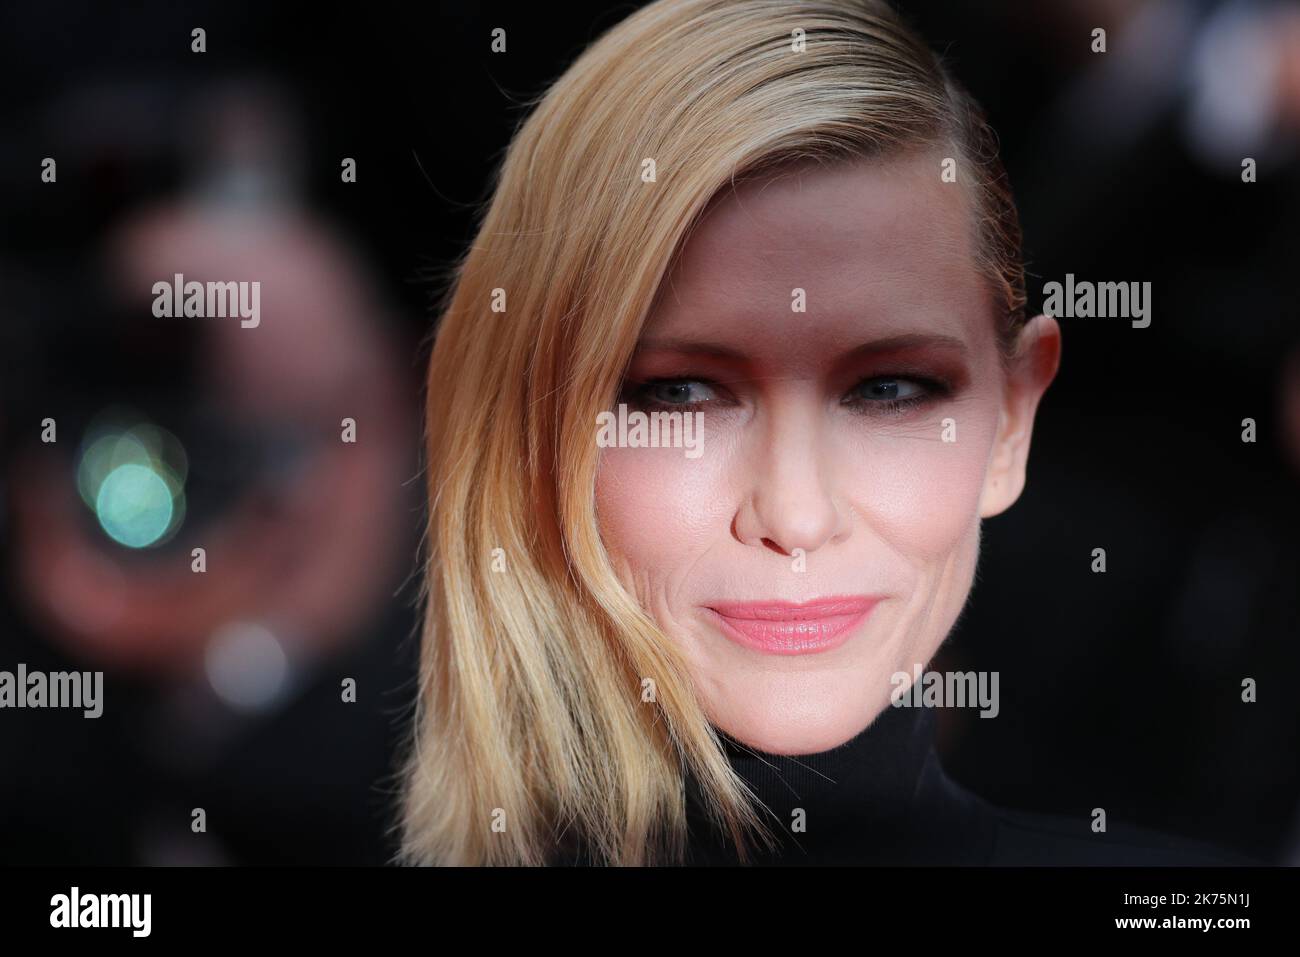 Cannes Film Festival 2018 - 71st edition - Day 7 - May 14 in Cannes, on May 14, 2018; Screening of the film 'BlacKkKlansman';  Cate Blanchett, Australian actress and President of the Jury . © Pierre Teyssot / Maxppp Stock Photo